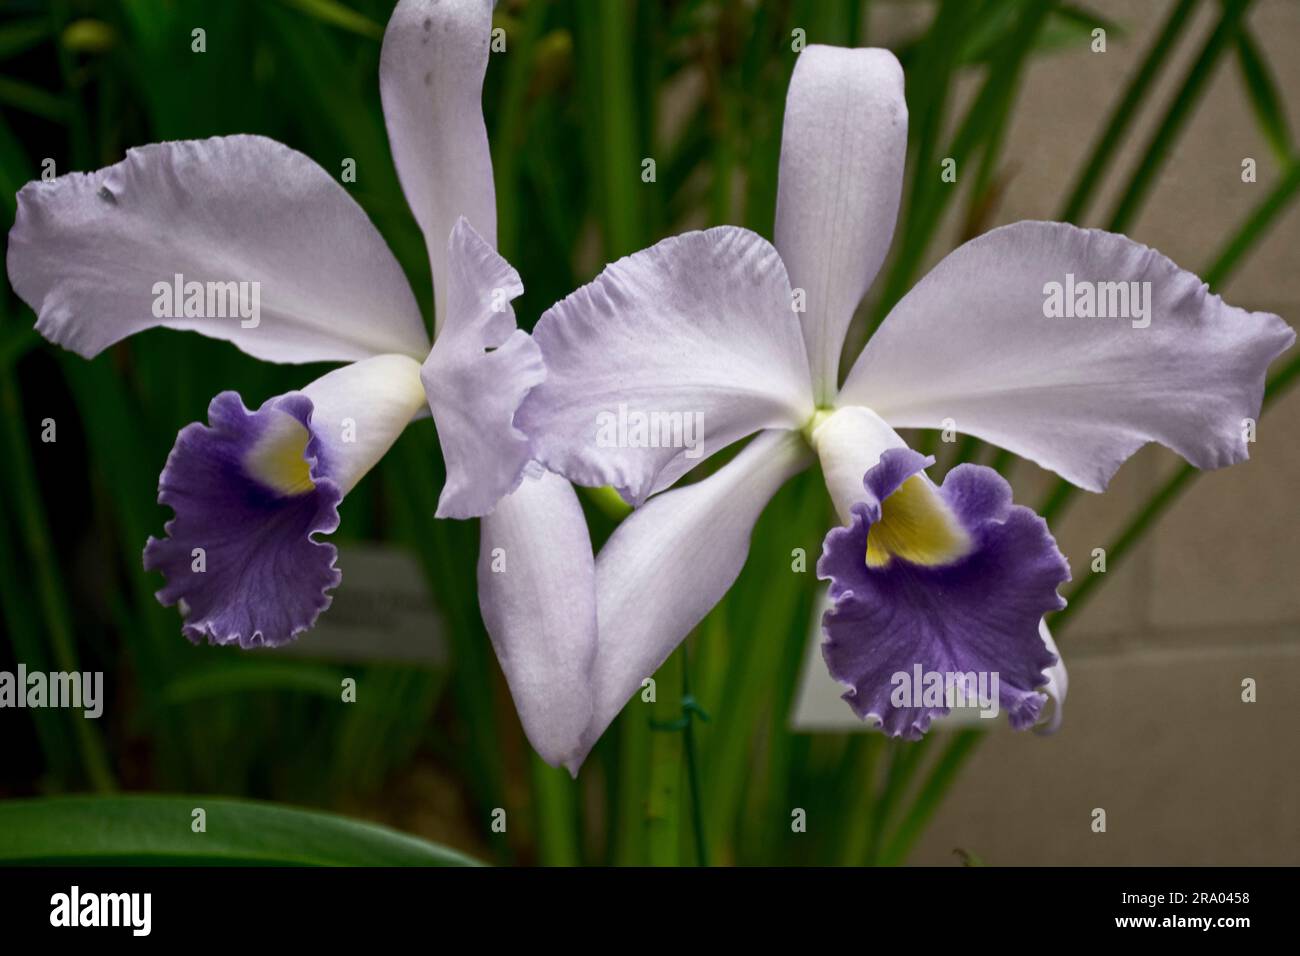 Gorgeous and elegant white orchid flowers with purple petals for ornament Stock Photo